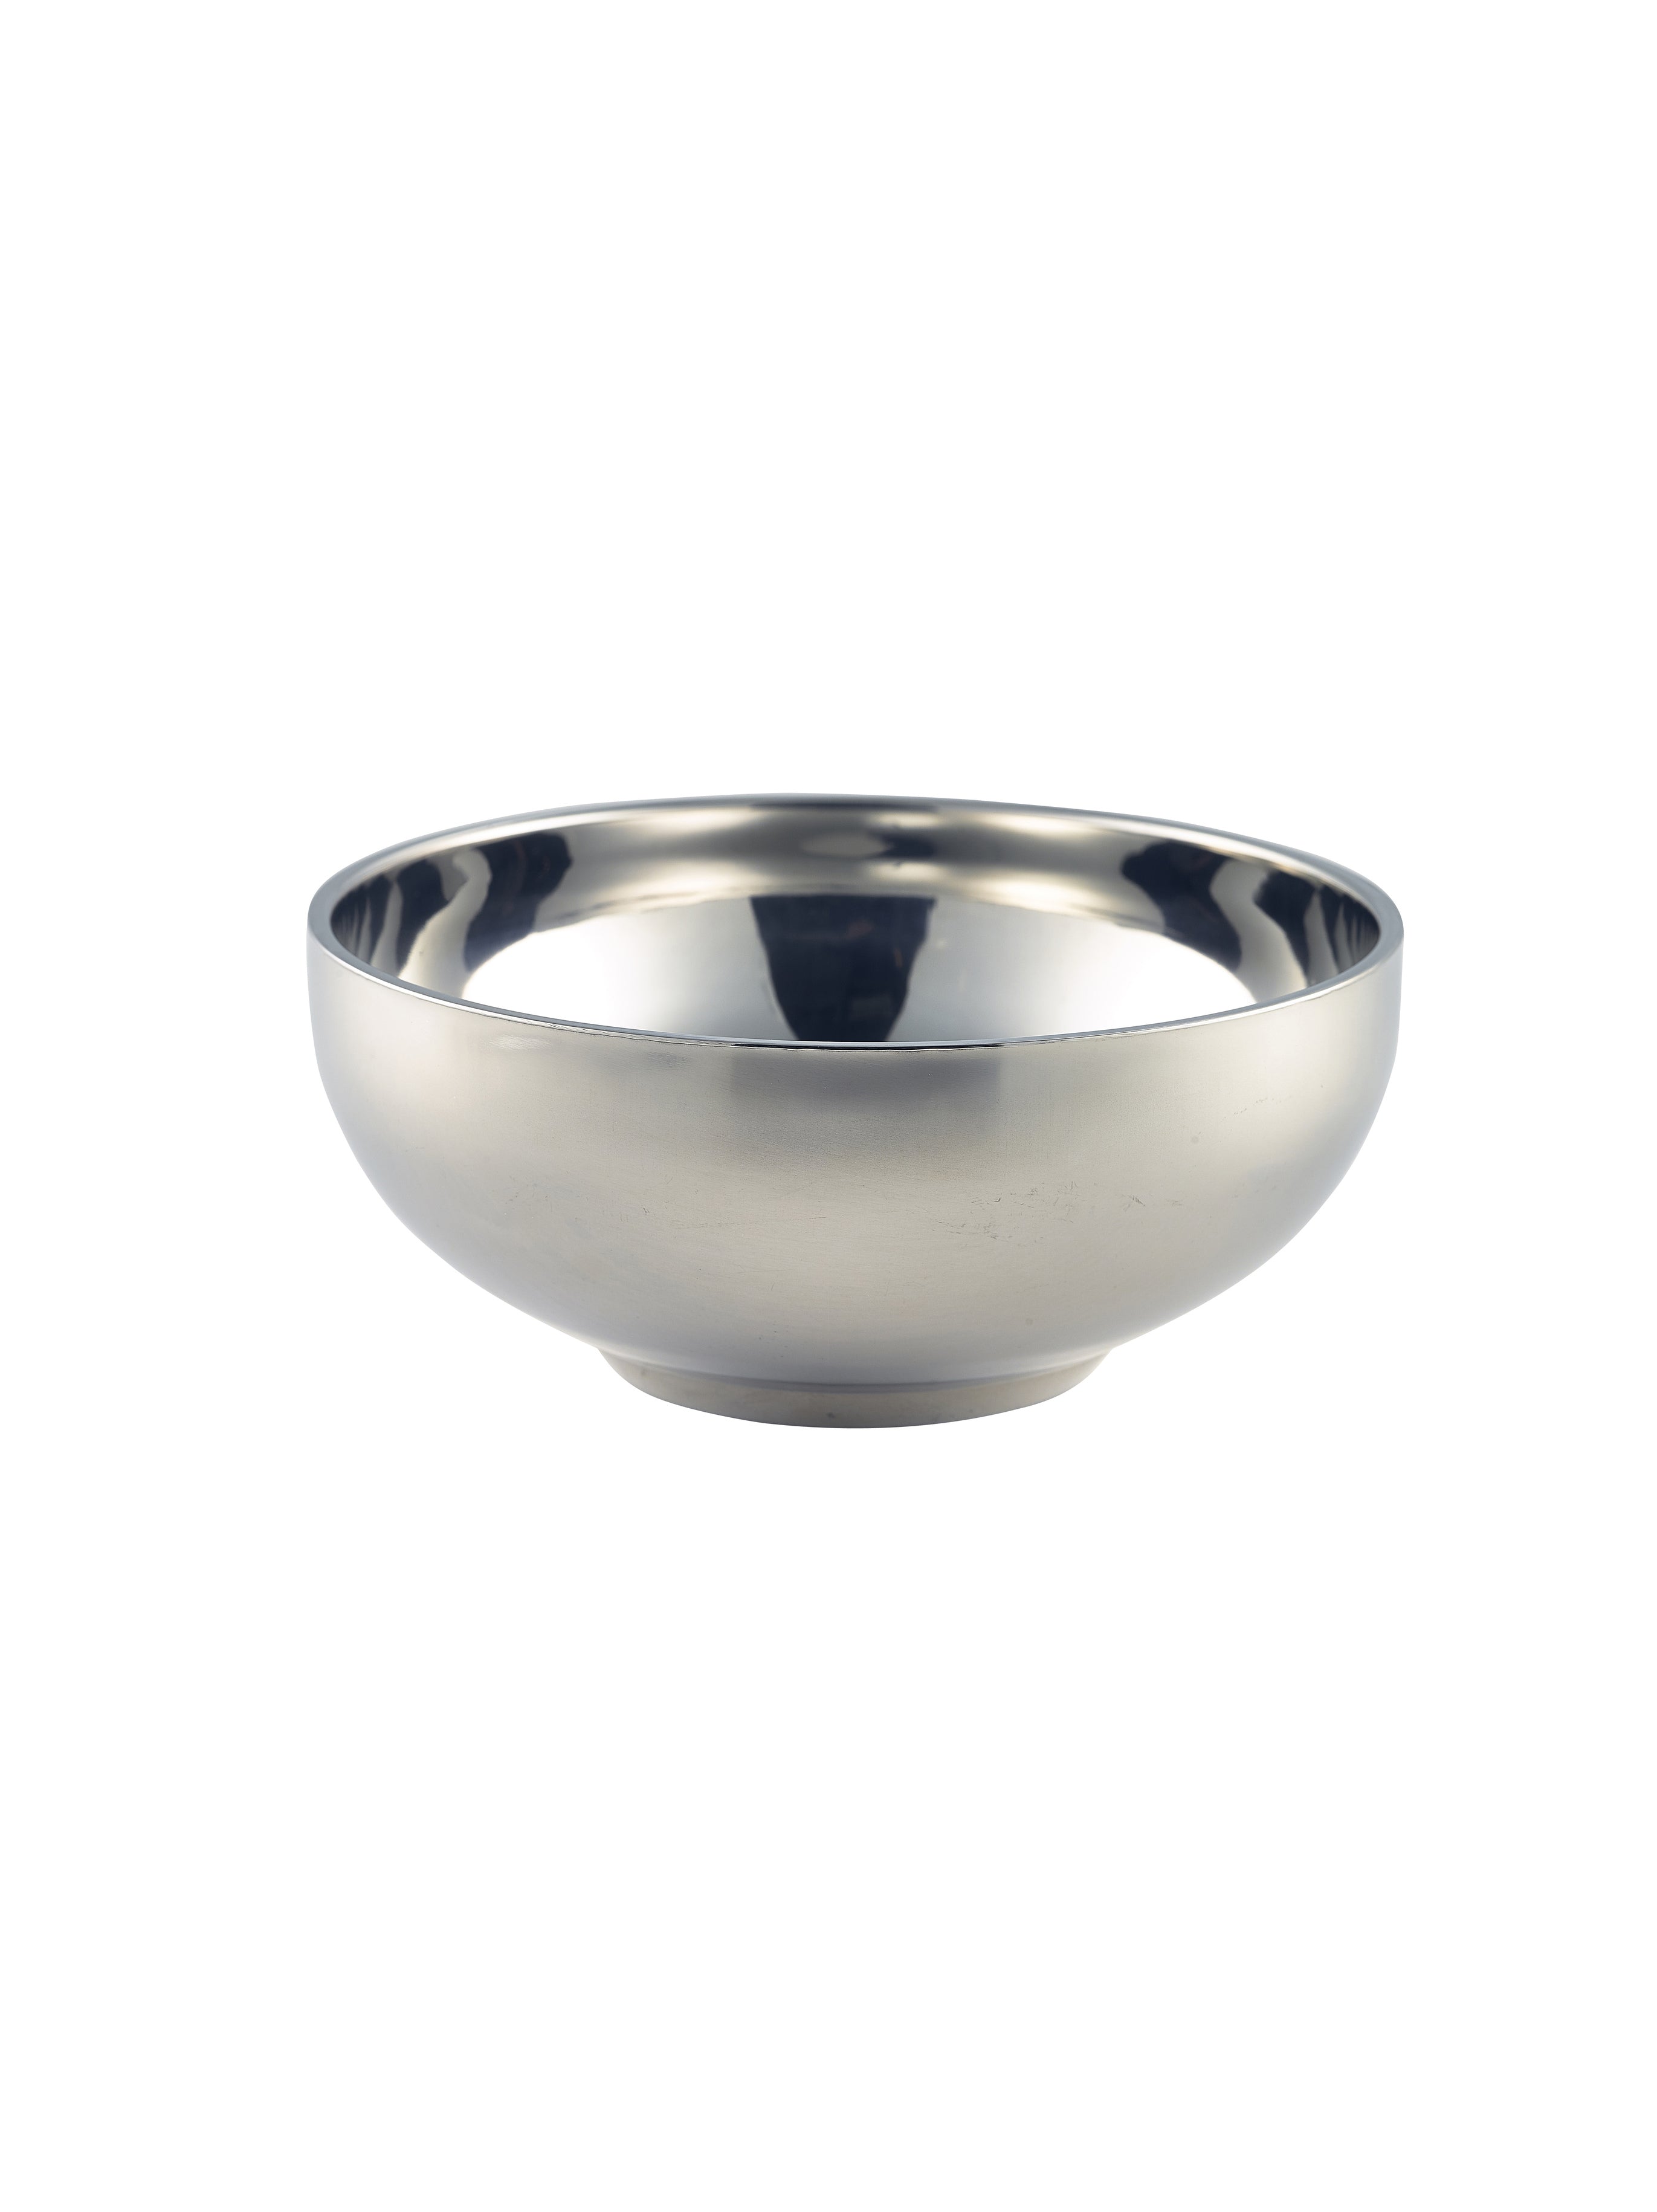 Stainless Steel Double Walled Bowl 14cm